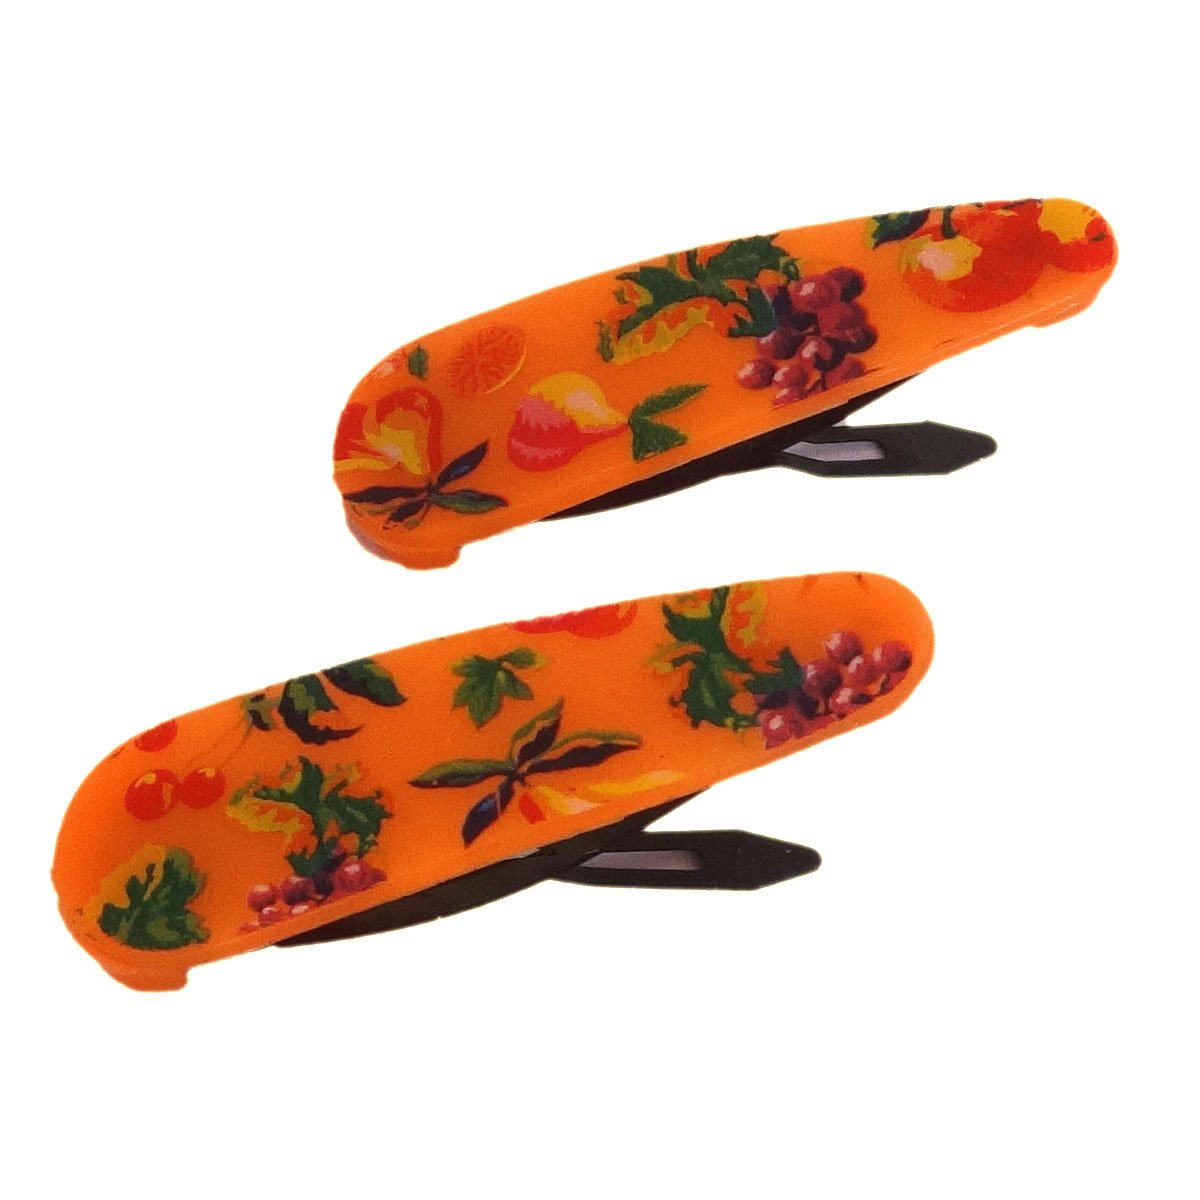 Anokhi ADA Printed Plastic on Metal Tik Tak Hair Clips For Girls (Combo of 6 Pair of Hair Clips) (ZD-08)